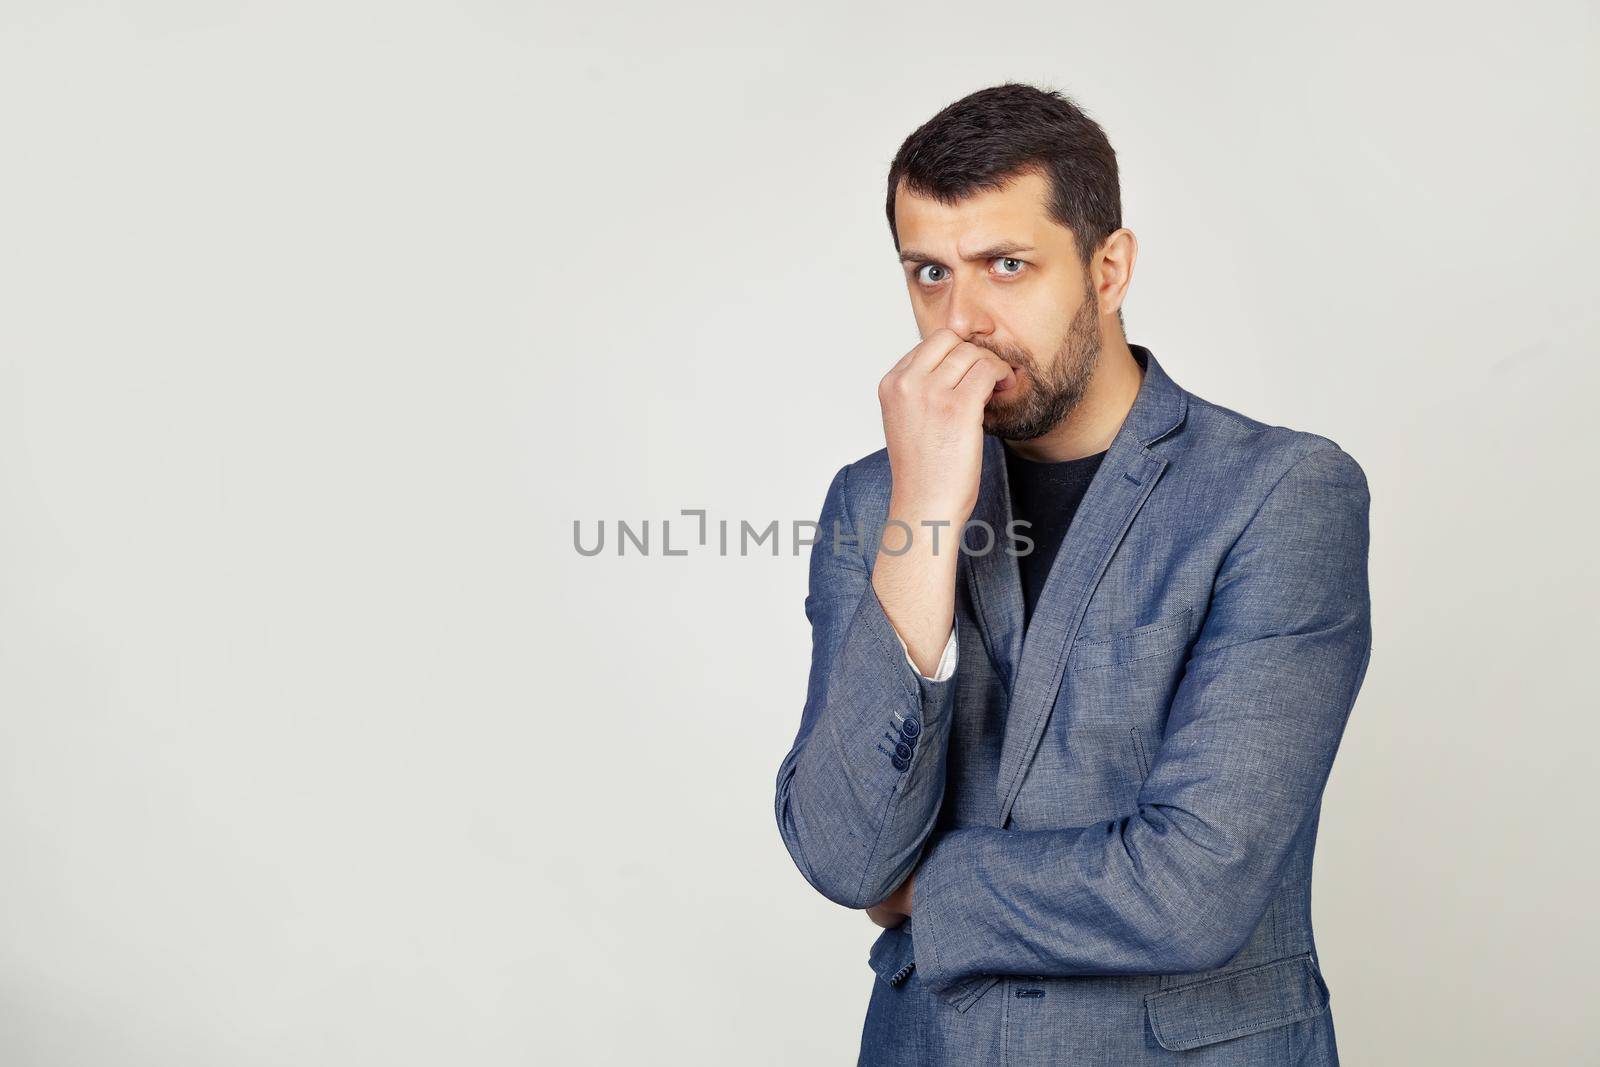 Young businessman with a smile, a man with a beard in a jacket, looks tense and nervous with hands on his lips, biting his nails. Anxiety problem. Portrait of a man on a gray background by ViShark